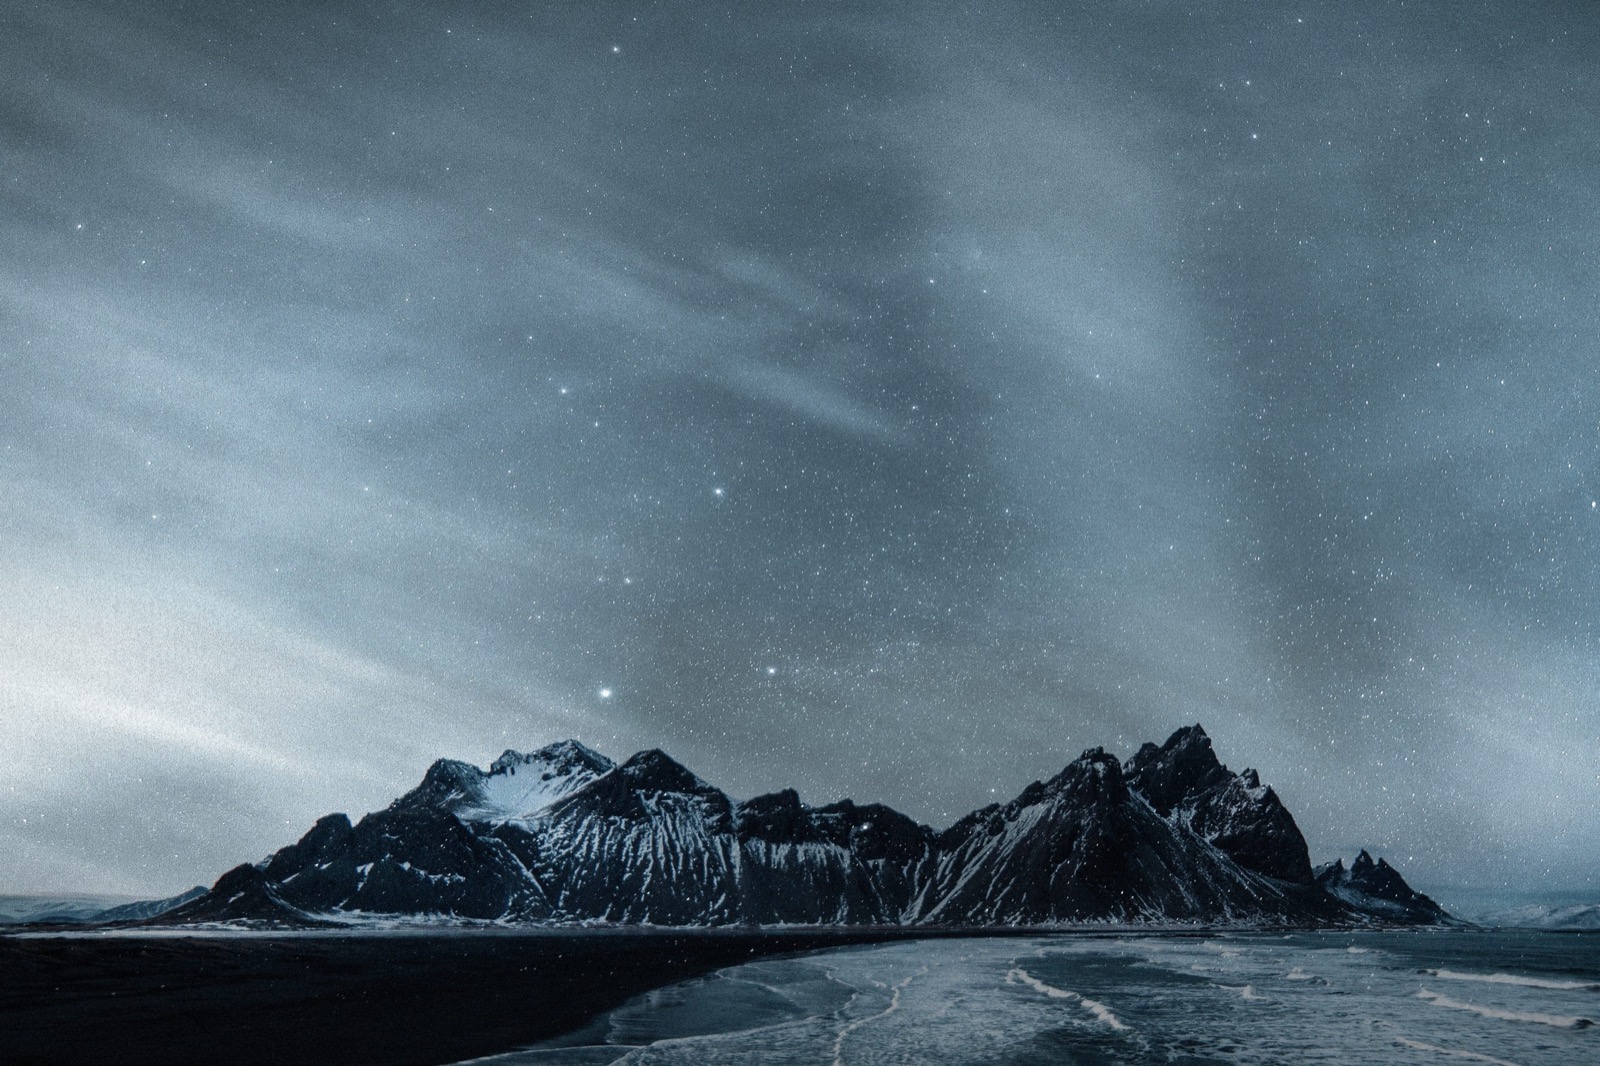 Challenge Yourself in This General Knowledge Quiz — Do You Have What It Takes to Score 75%? Stokksnes, Vatnajokull National Park, Iceland, Starry sky mountain